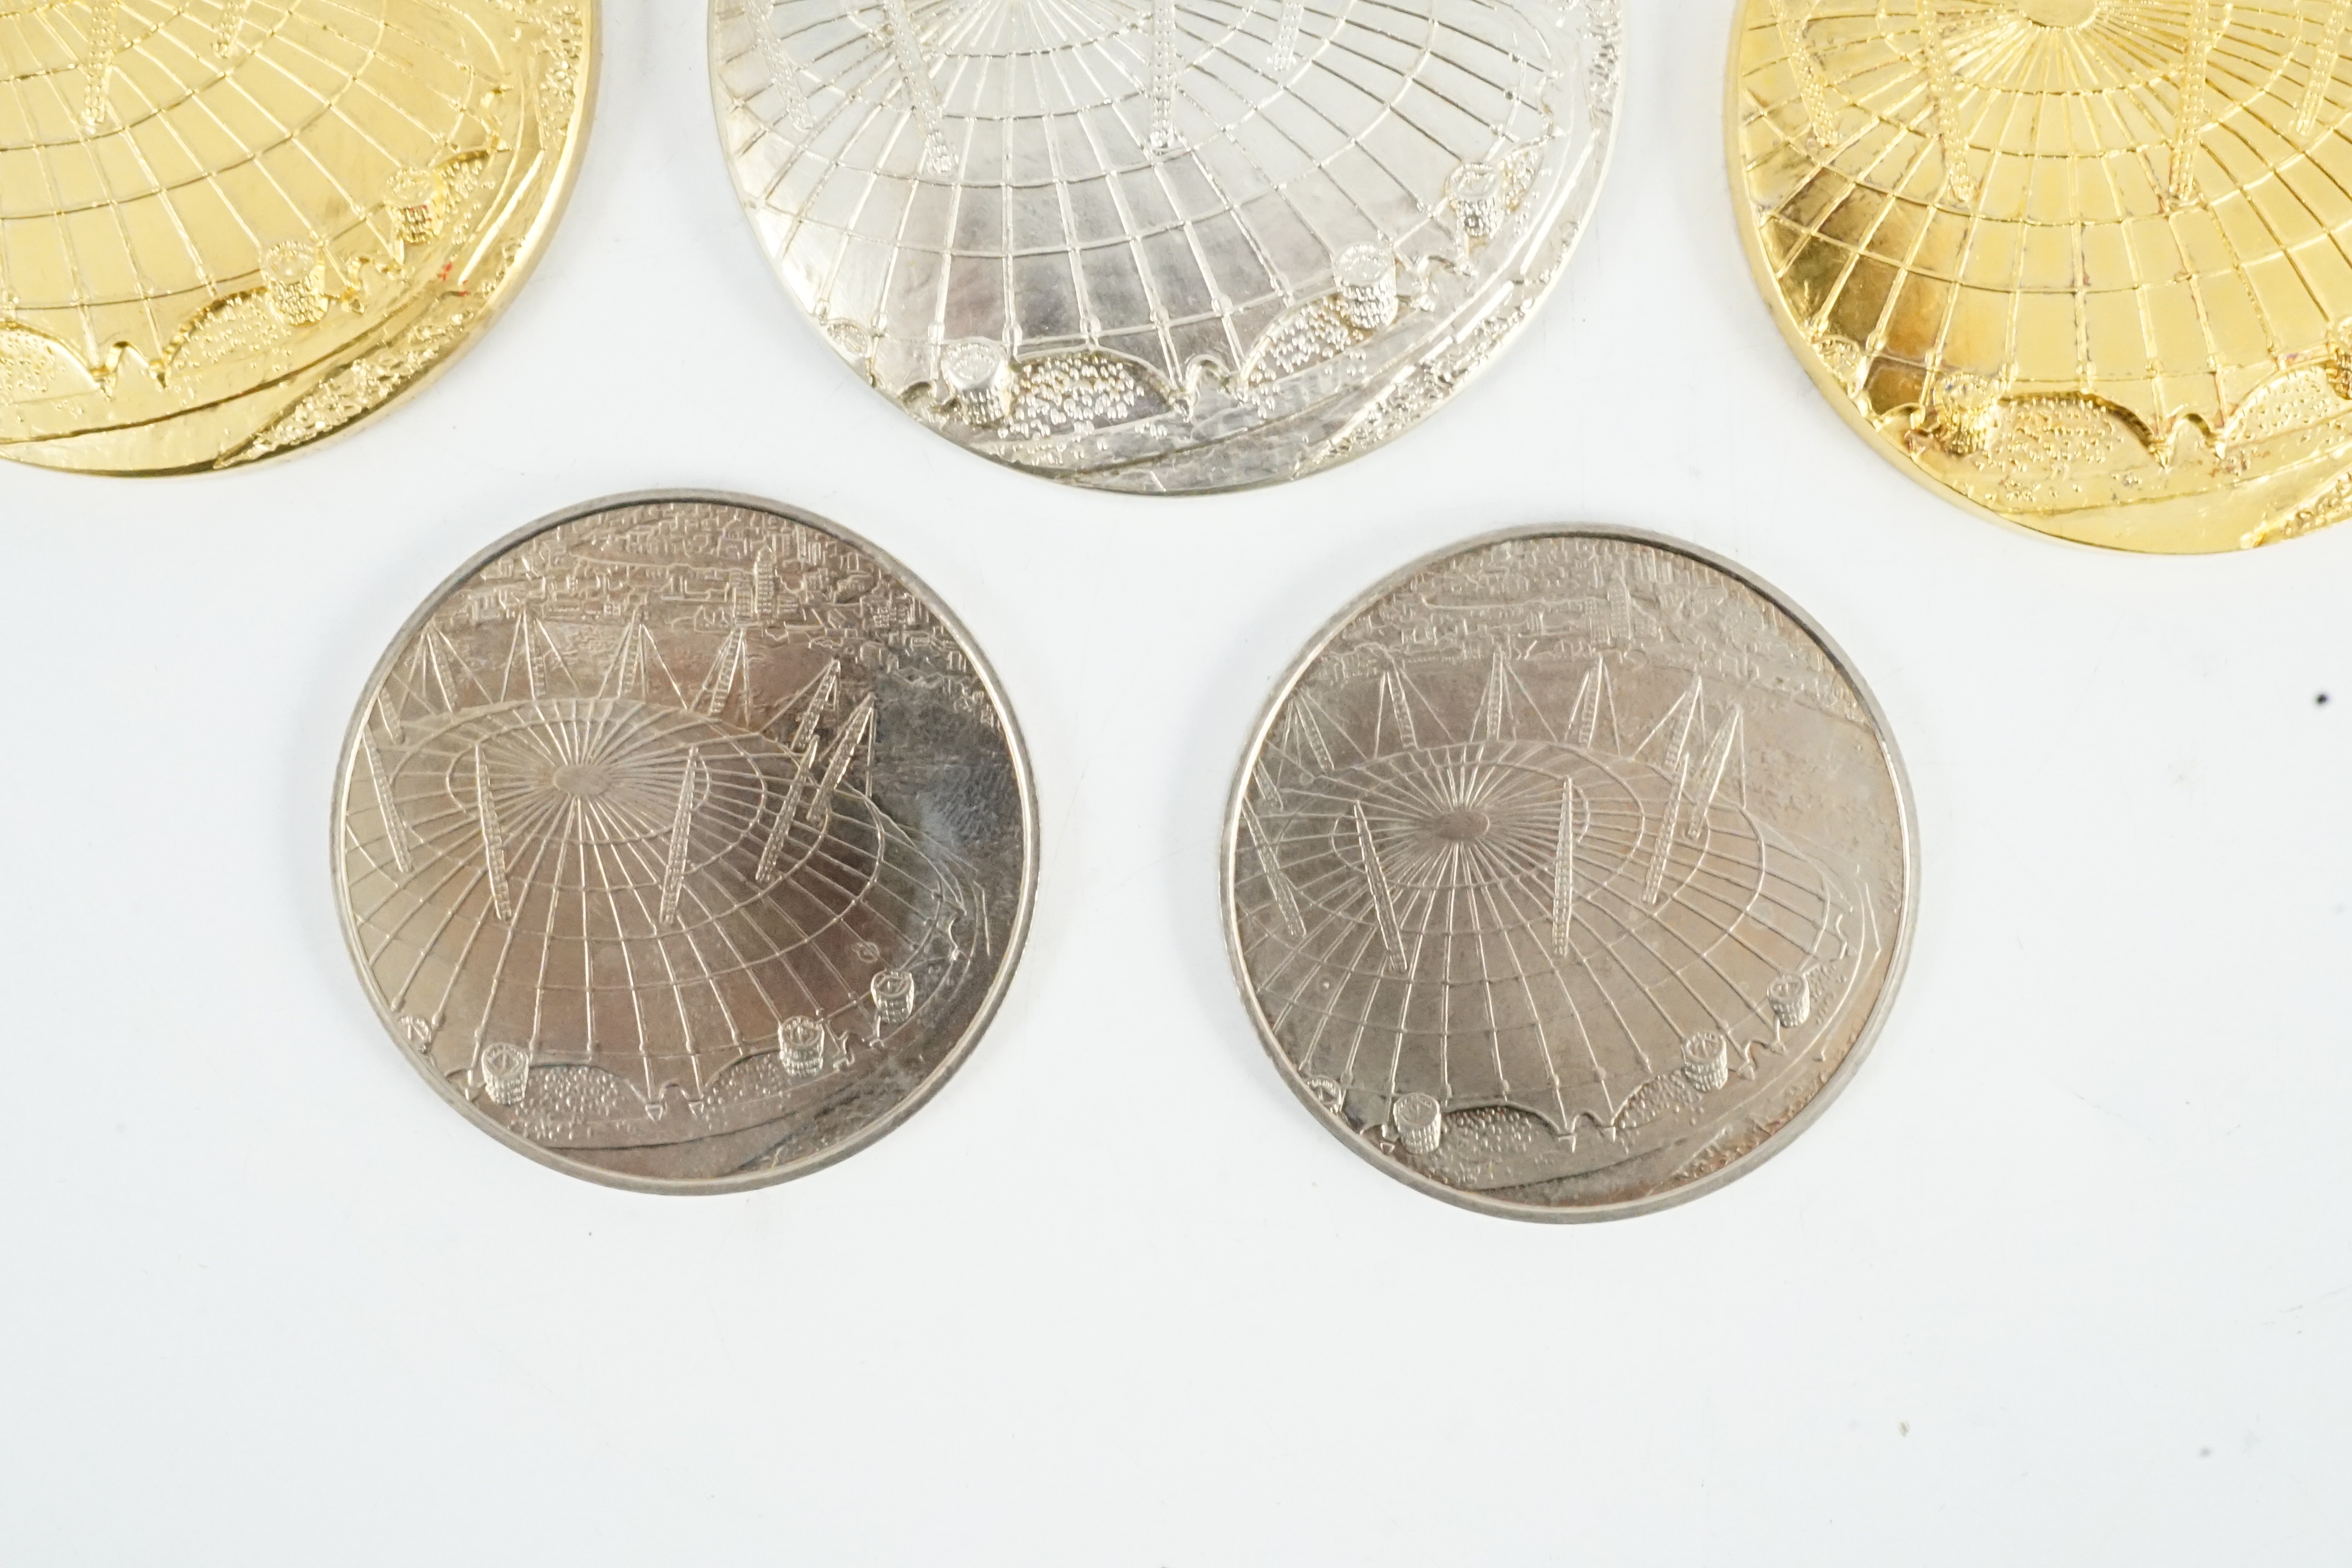 Jacqueline Stieger (b.1936) for Royal Mint, two prototype silver-gilt (Millennium) Dome medals, - Image 5 of 6